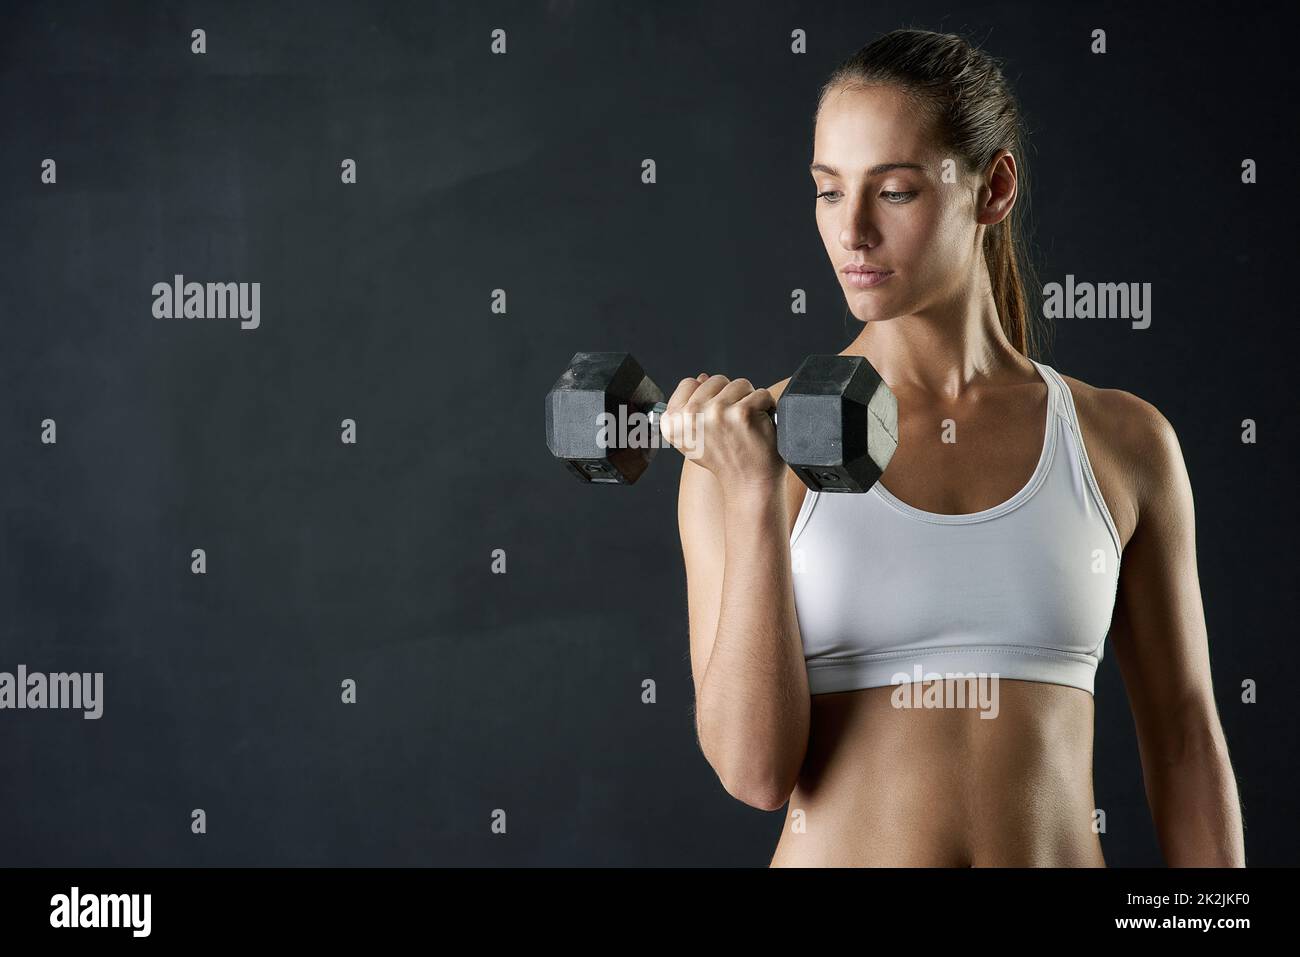 Focusing on her arms. Studio shot of an attractive young woman working out with a dumbbell against a dark background. Stock Photo